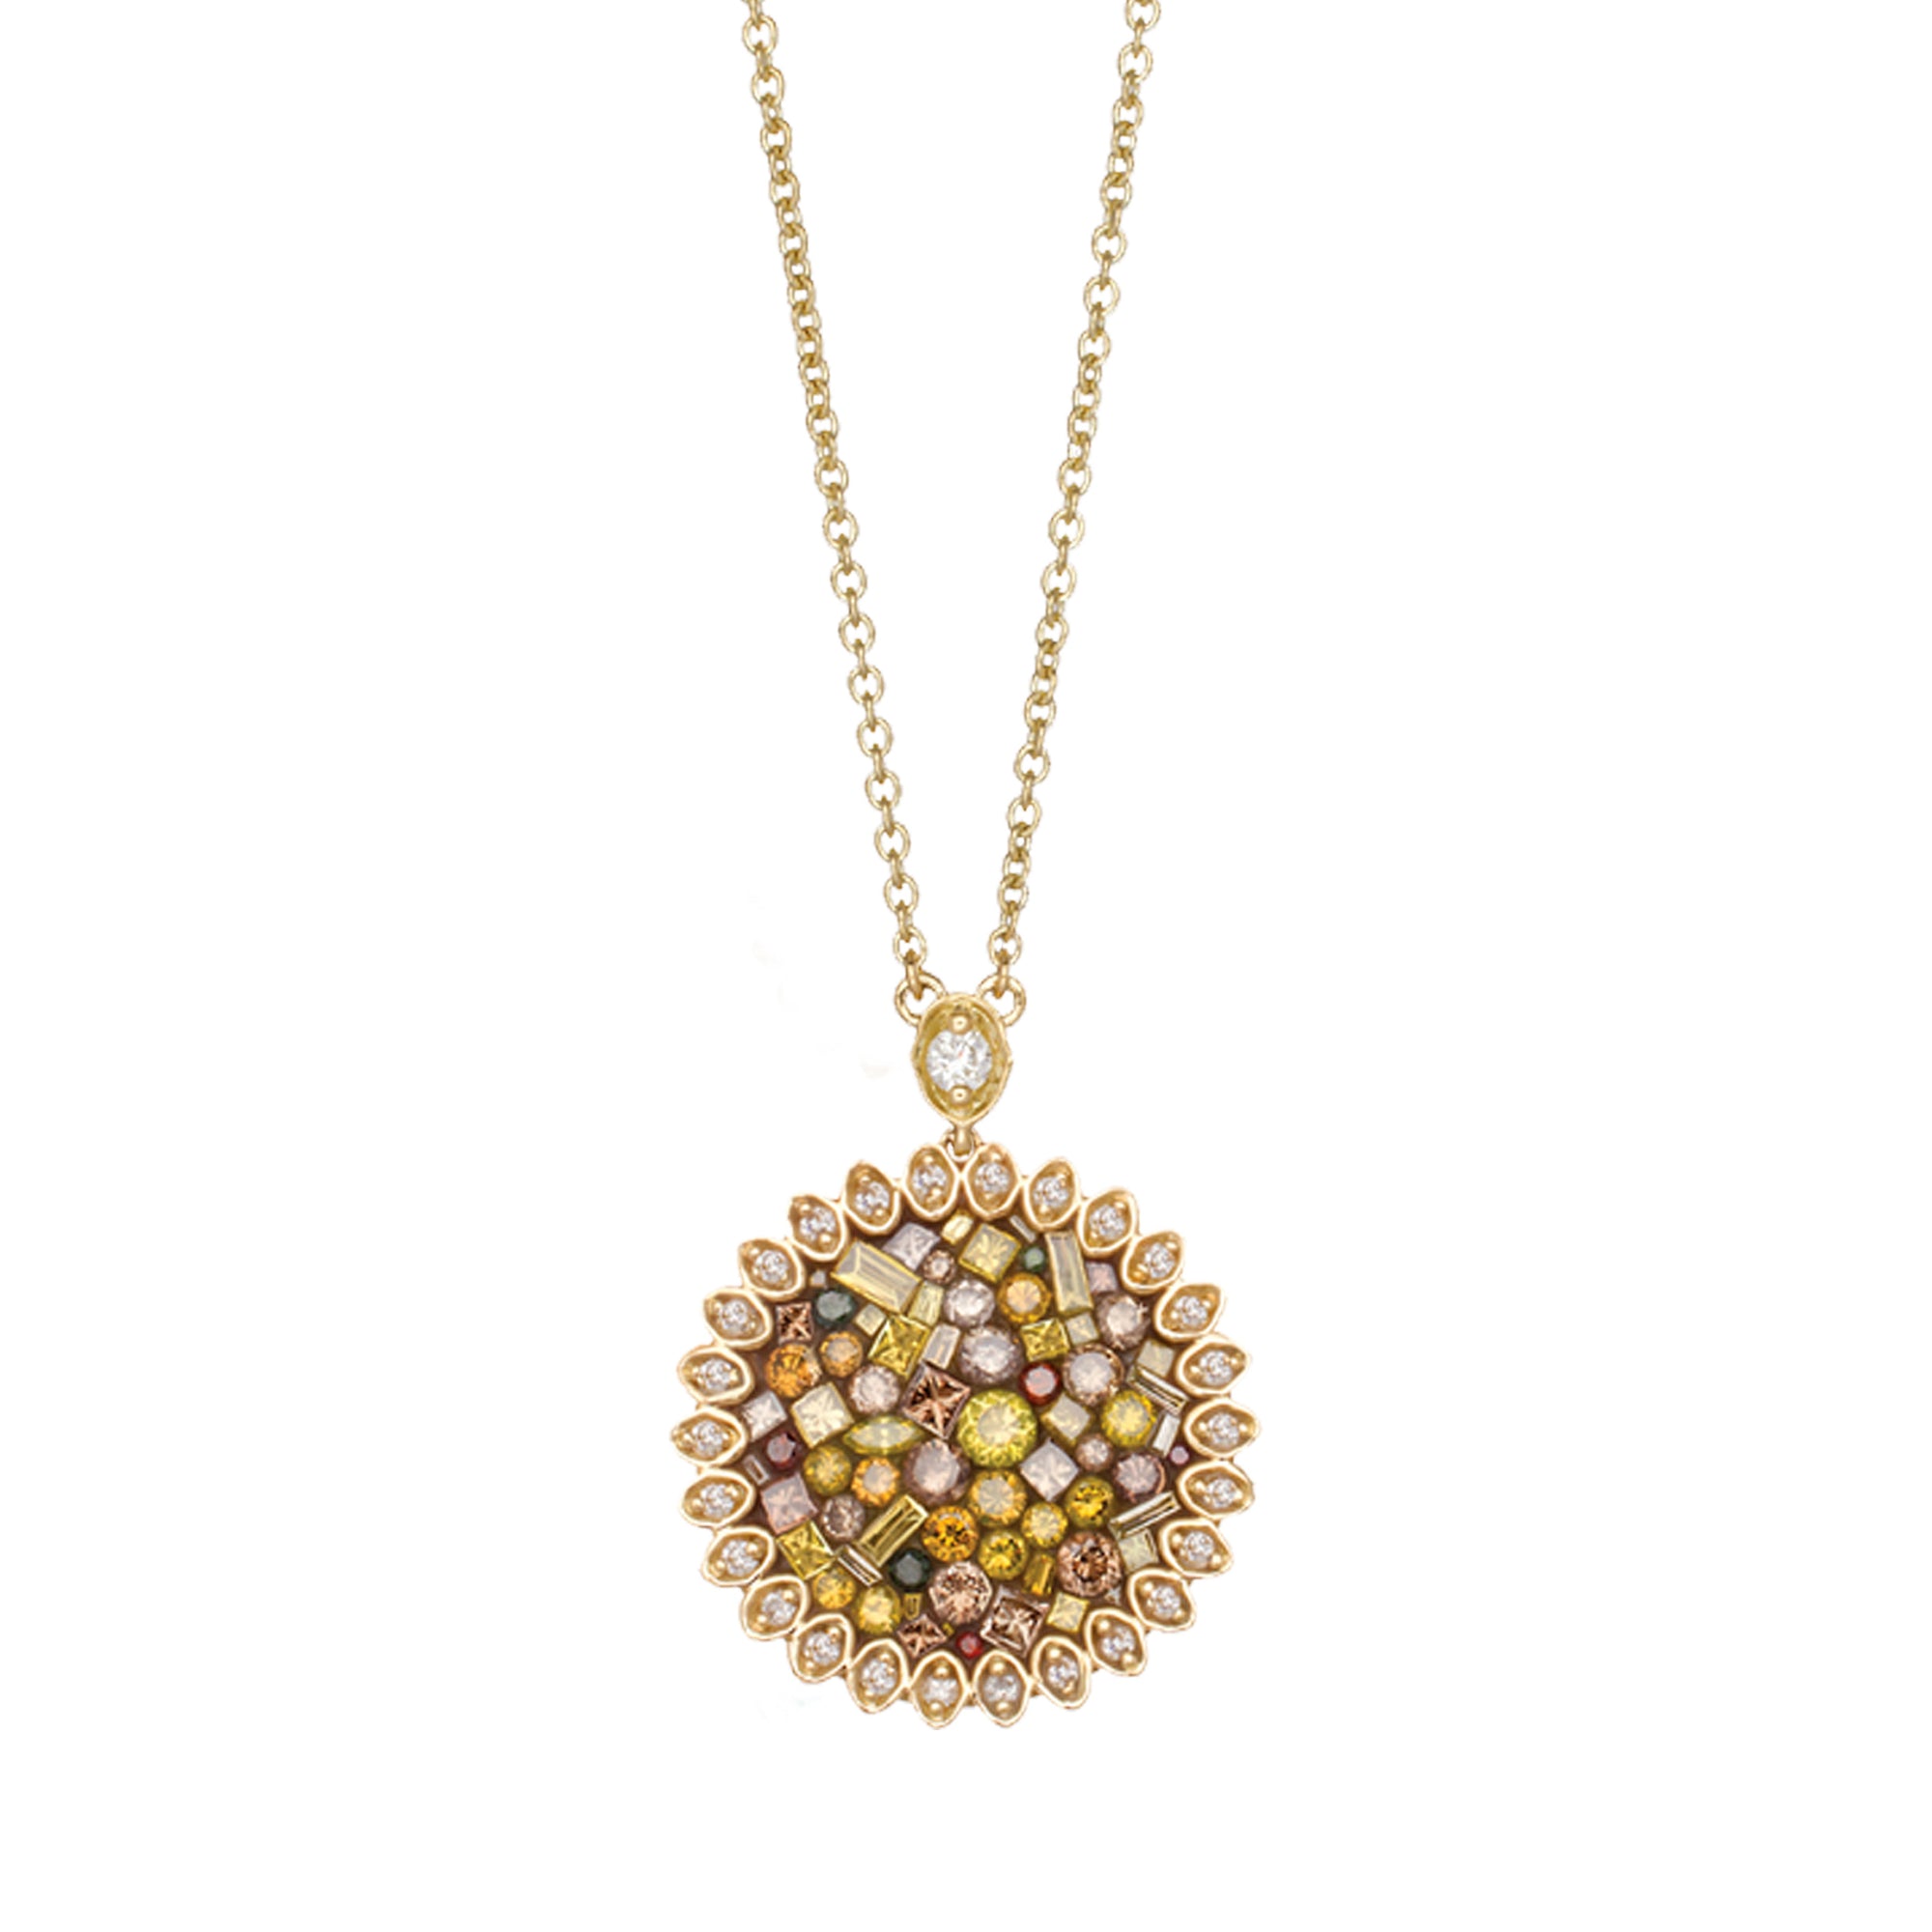 Cinnamon Sunflower Diamond Necklace by Pleve available at Talisman Collection Fine Jewelers in El Dorado Hills, CA and online. Specs: 18k yellow gold; color enhanced diamonds 1.80 cts